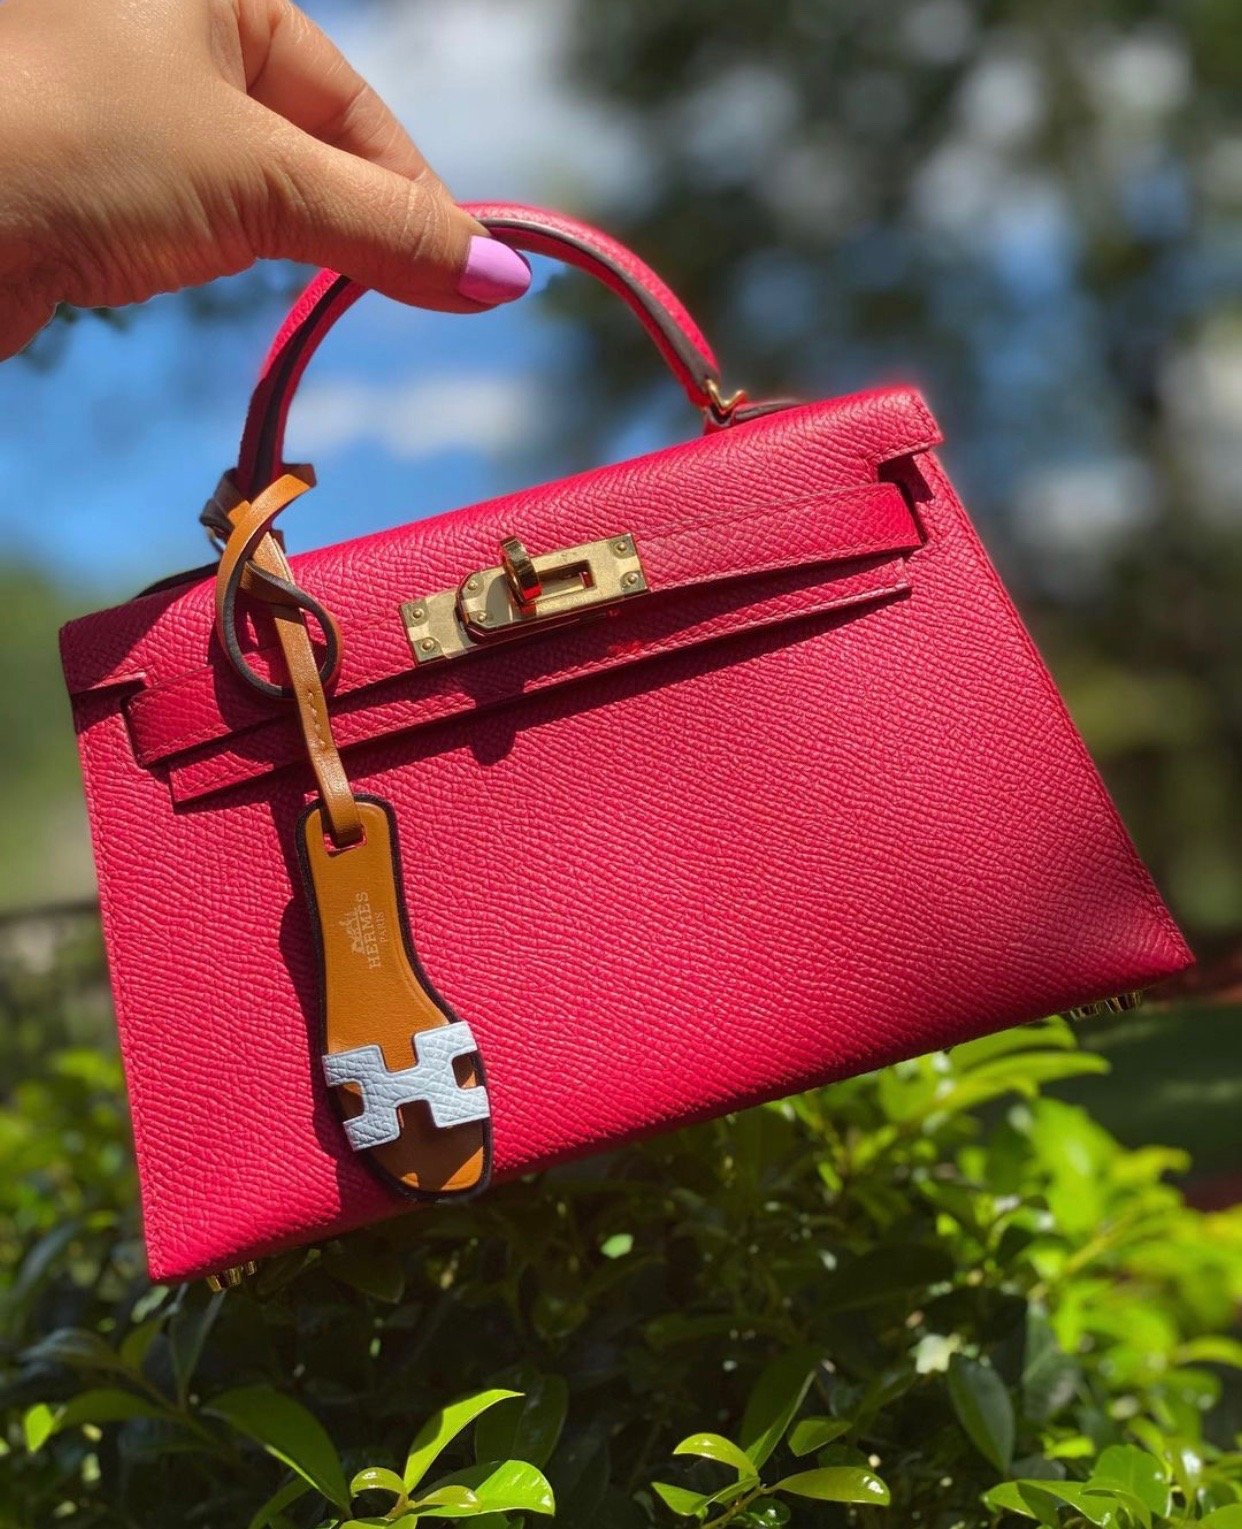 EVERYTHING TO KNOW ABOUT MINI KELLY  HERMES KELLY 20 II WORTH THE MONEY?!  IN-DEPTH REVIEW 